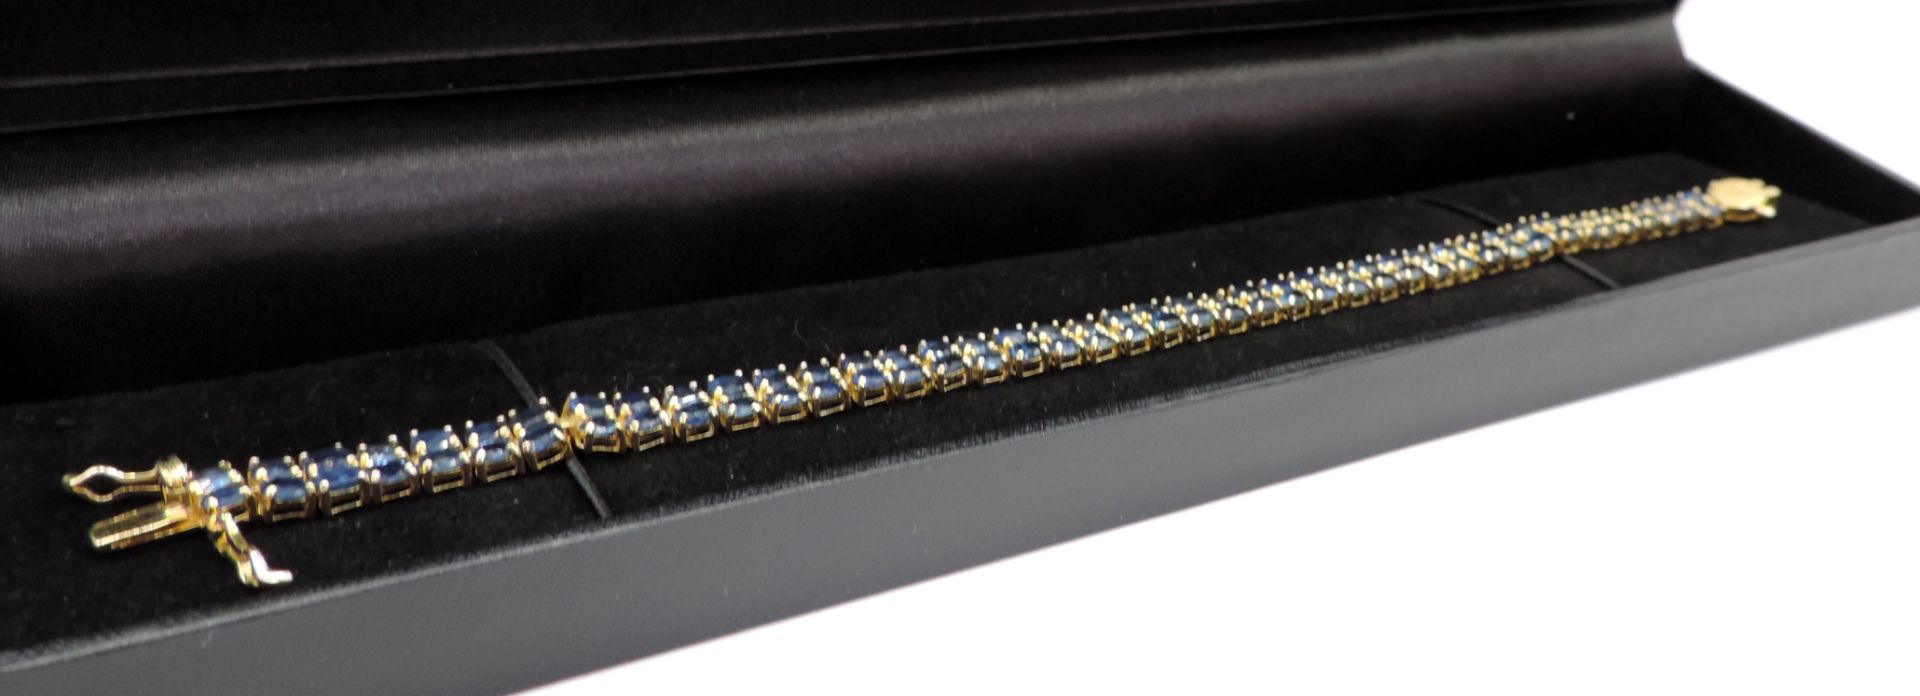 14K Gold on Sterling Silver 21.5CT Sapphire 2 Row Line Bracelet New with Gift Box - Image 4 of 5